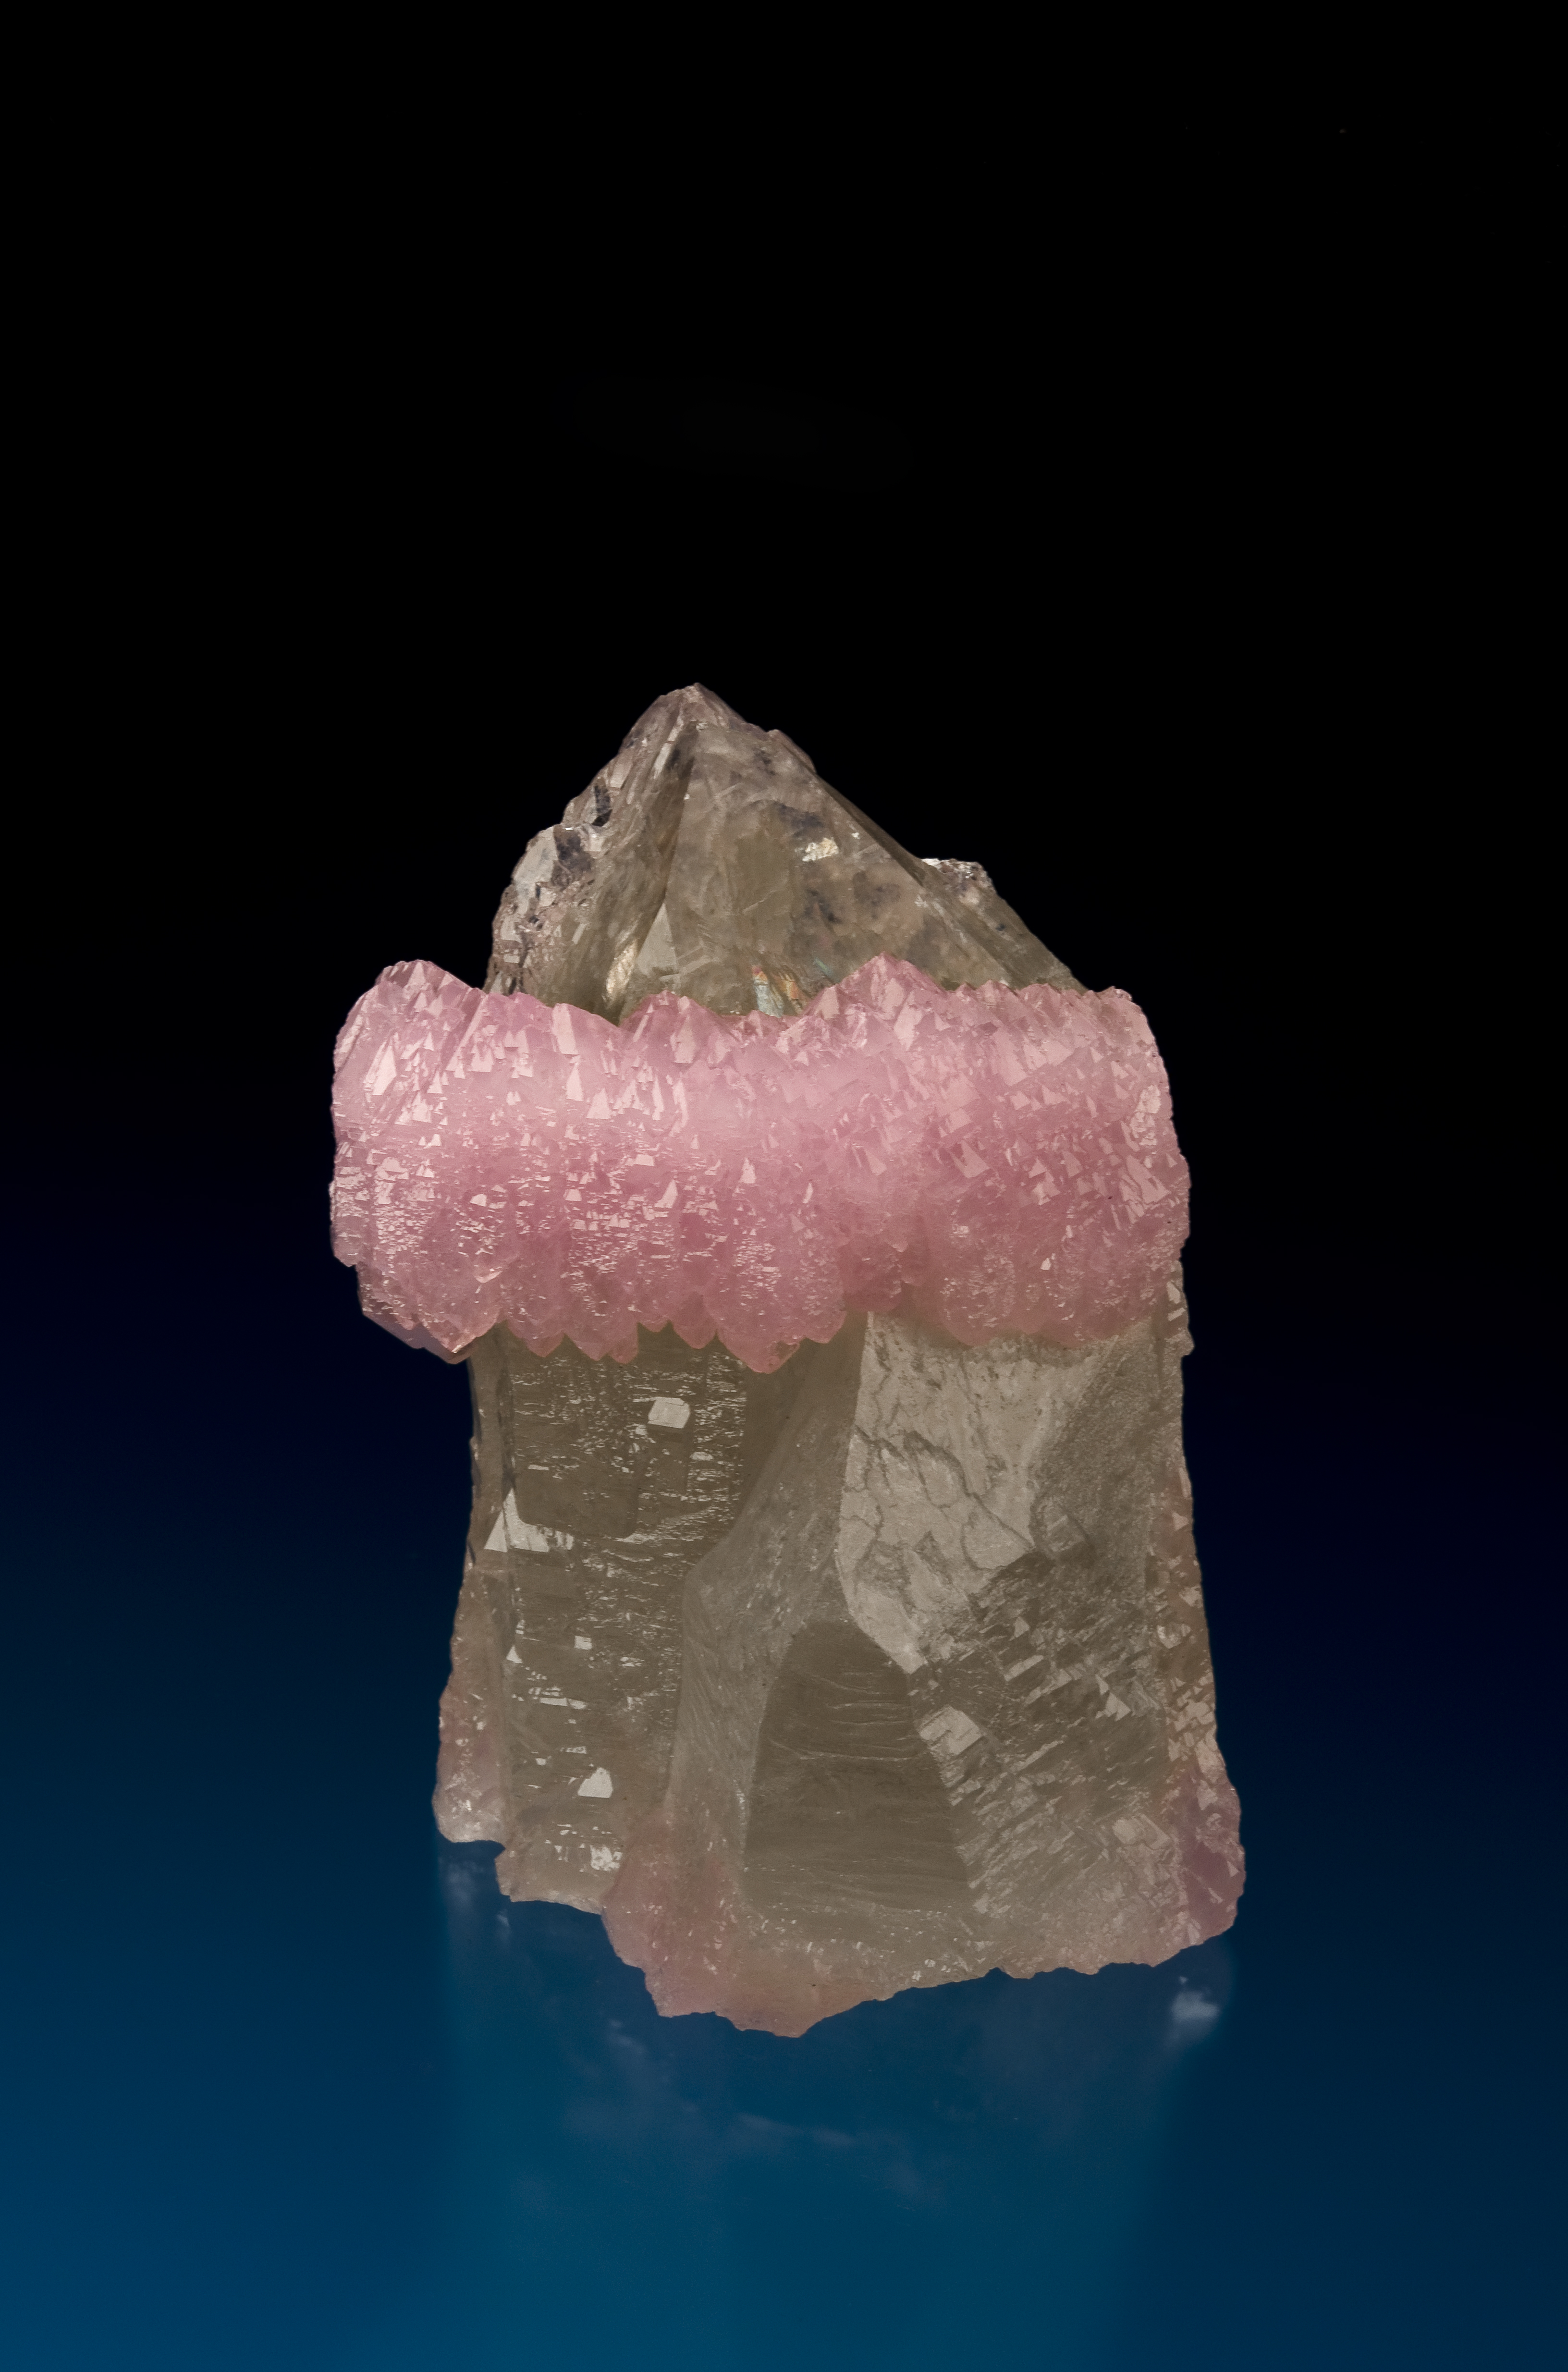 A smokey quartz crystal points upward on a blue background. Just before it reaches its point. A halo of baby pink rose quartz surrounds the crystal just before it reaches its point.